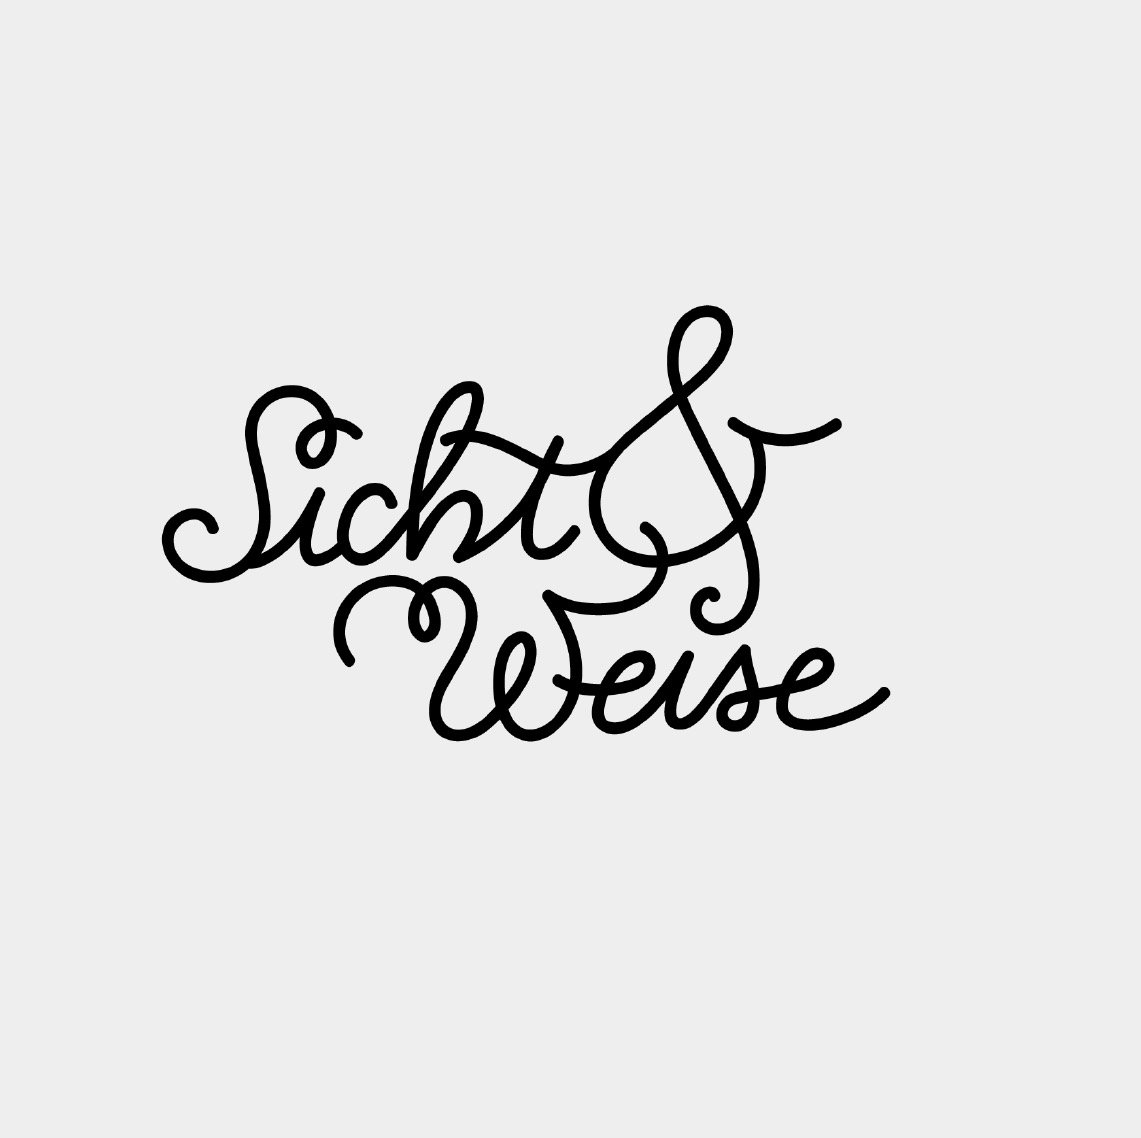 Do you know this situation when you stumble over a #draft after a longer period and suddenly it is so much easier for the eye to spot points for improvement ... #trainyoureyes #Calligraphy #writtenbyhand #logotype #lettershapes #practicewriting #lettering #scheibschrift #cursive